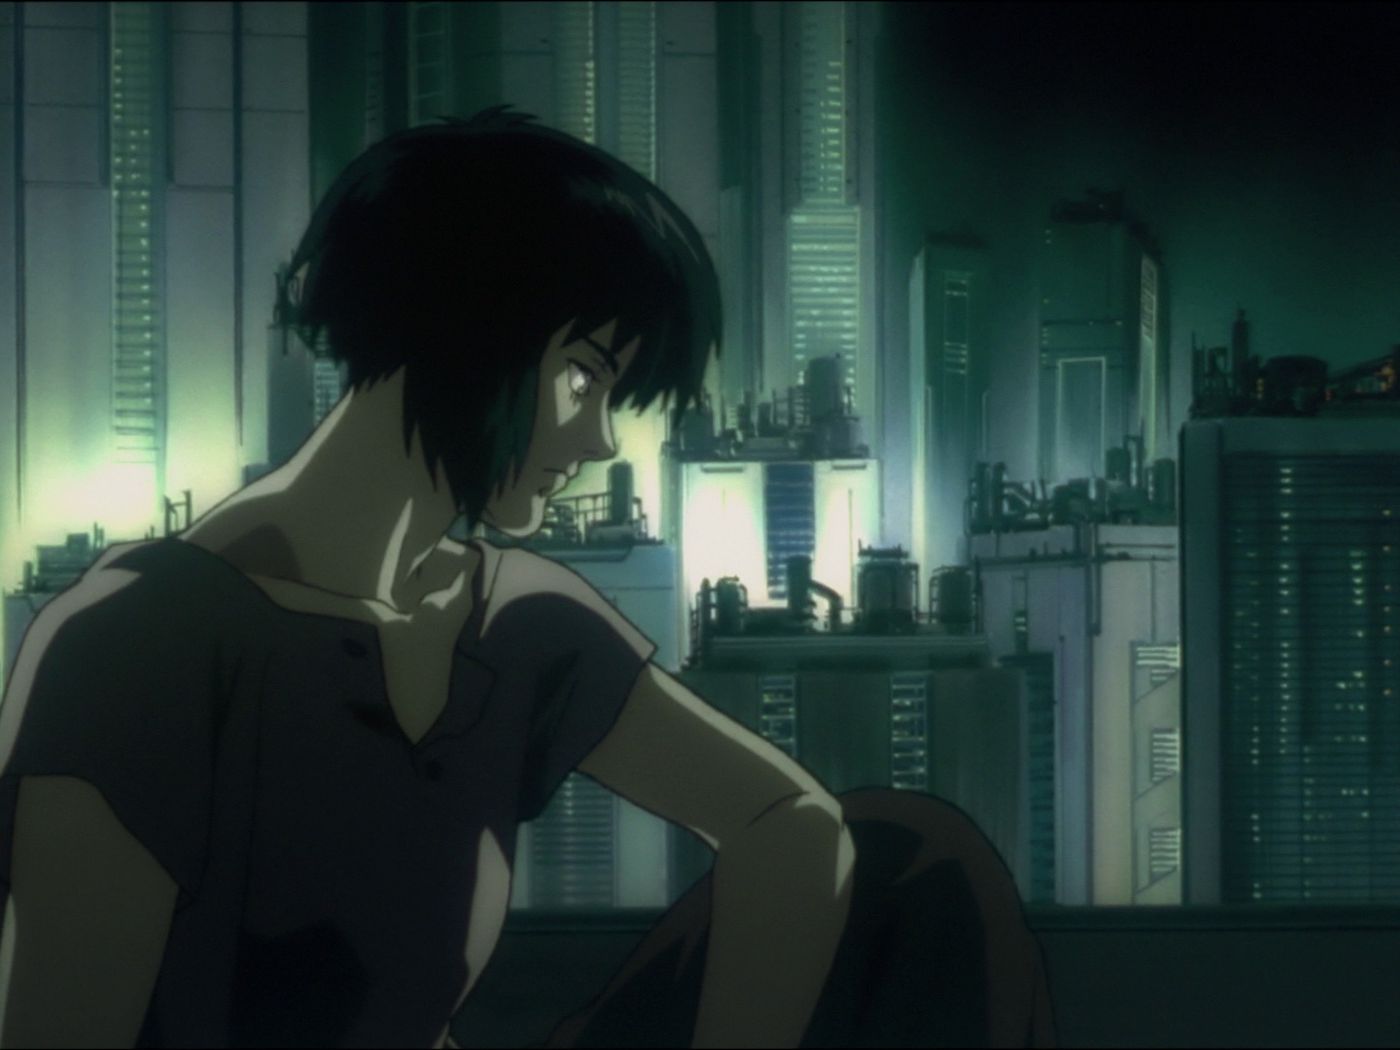 The Original Ghost In The Shell Is Iconic Anime And A Rich